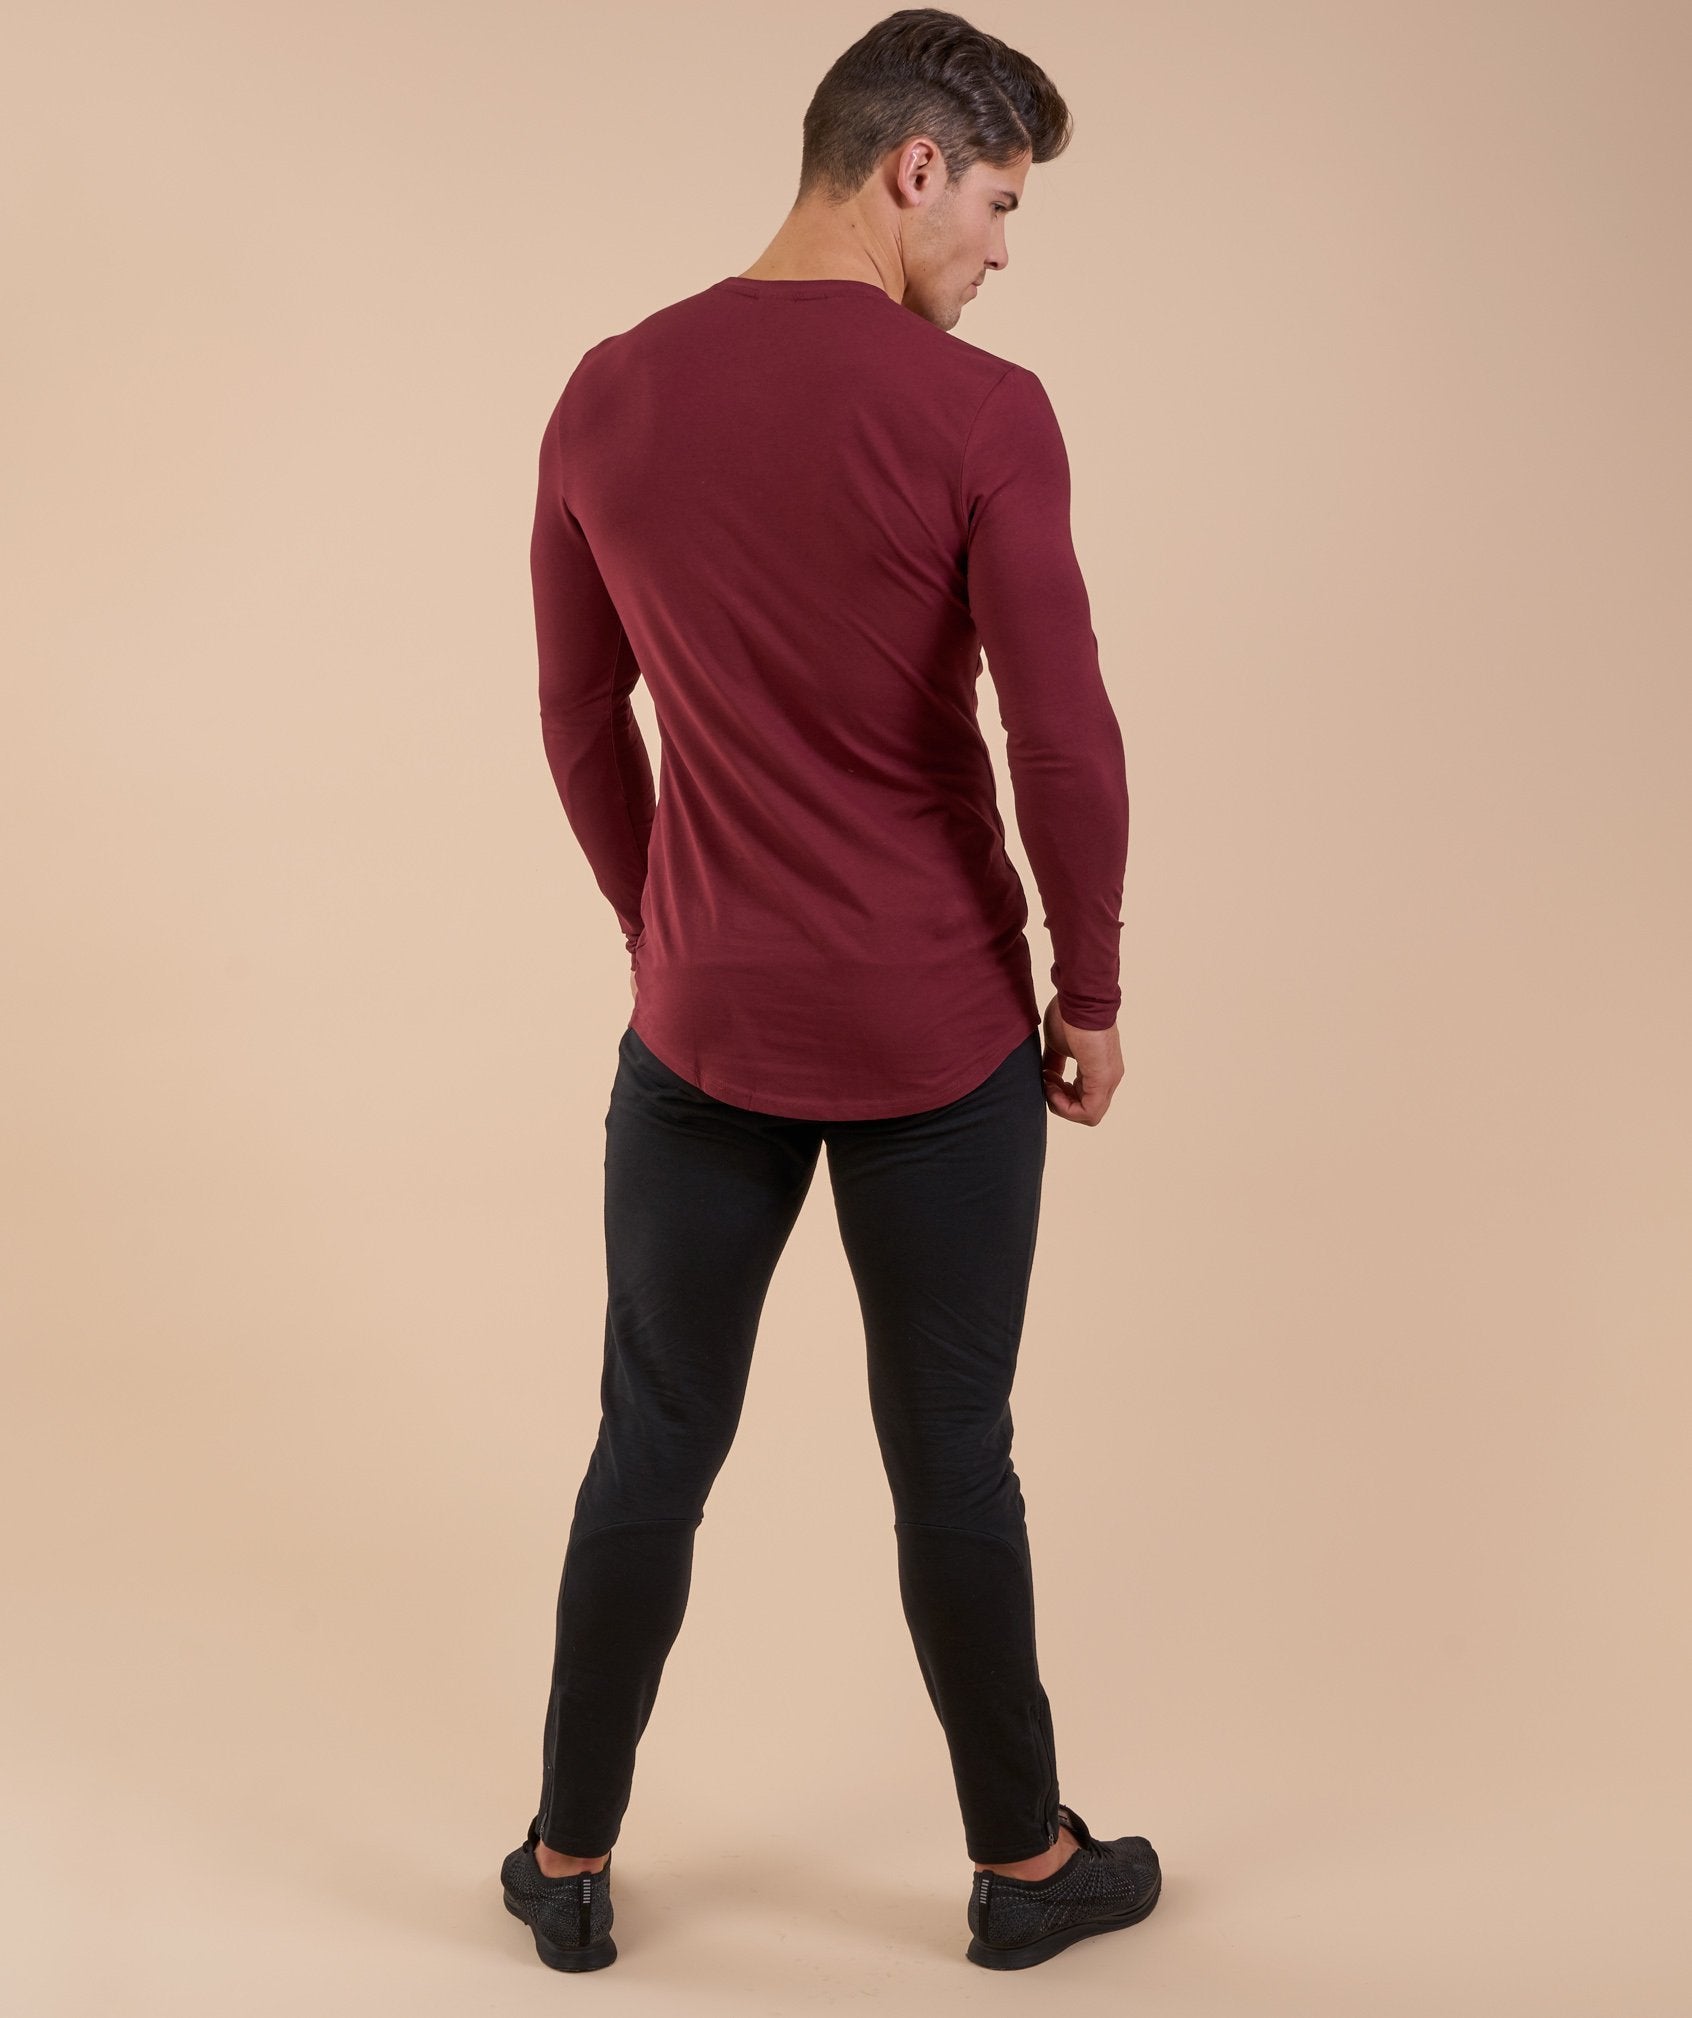 Solace Longline Long Sleeve T-shirt in Port - view 2